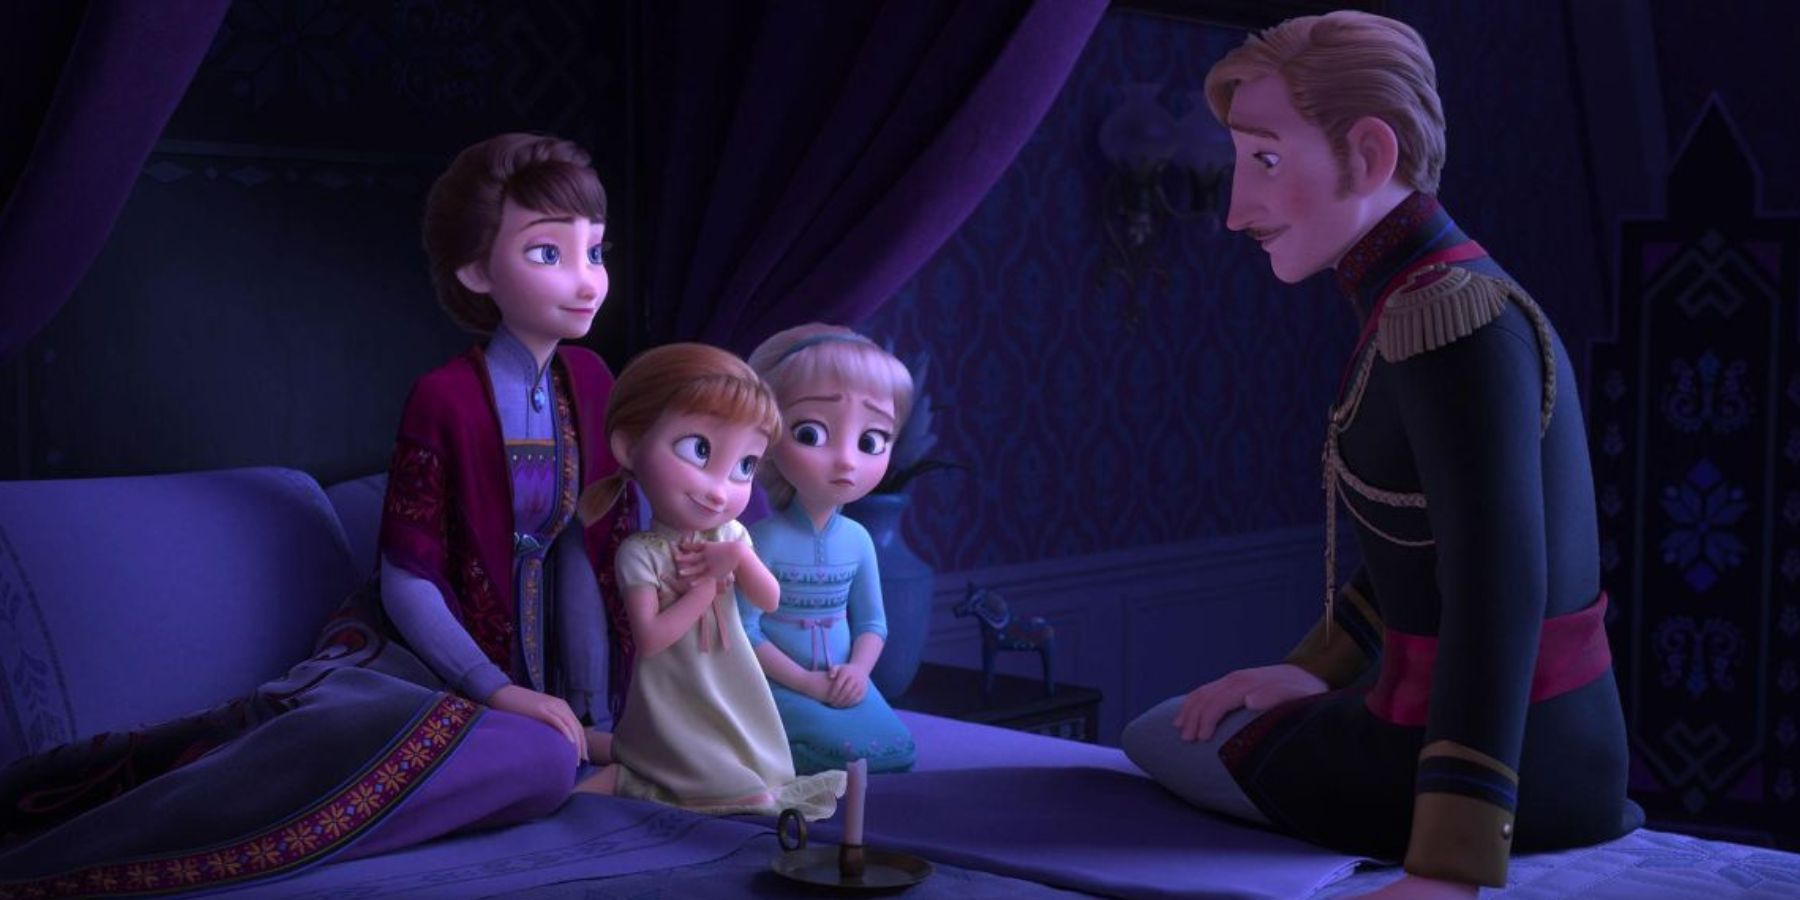 3 Years Ago, Disney Fixed Its Biggest Frozen Criticism – & Made Anna & Elsa’s Story Even More Tragic